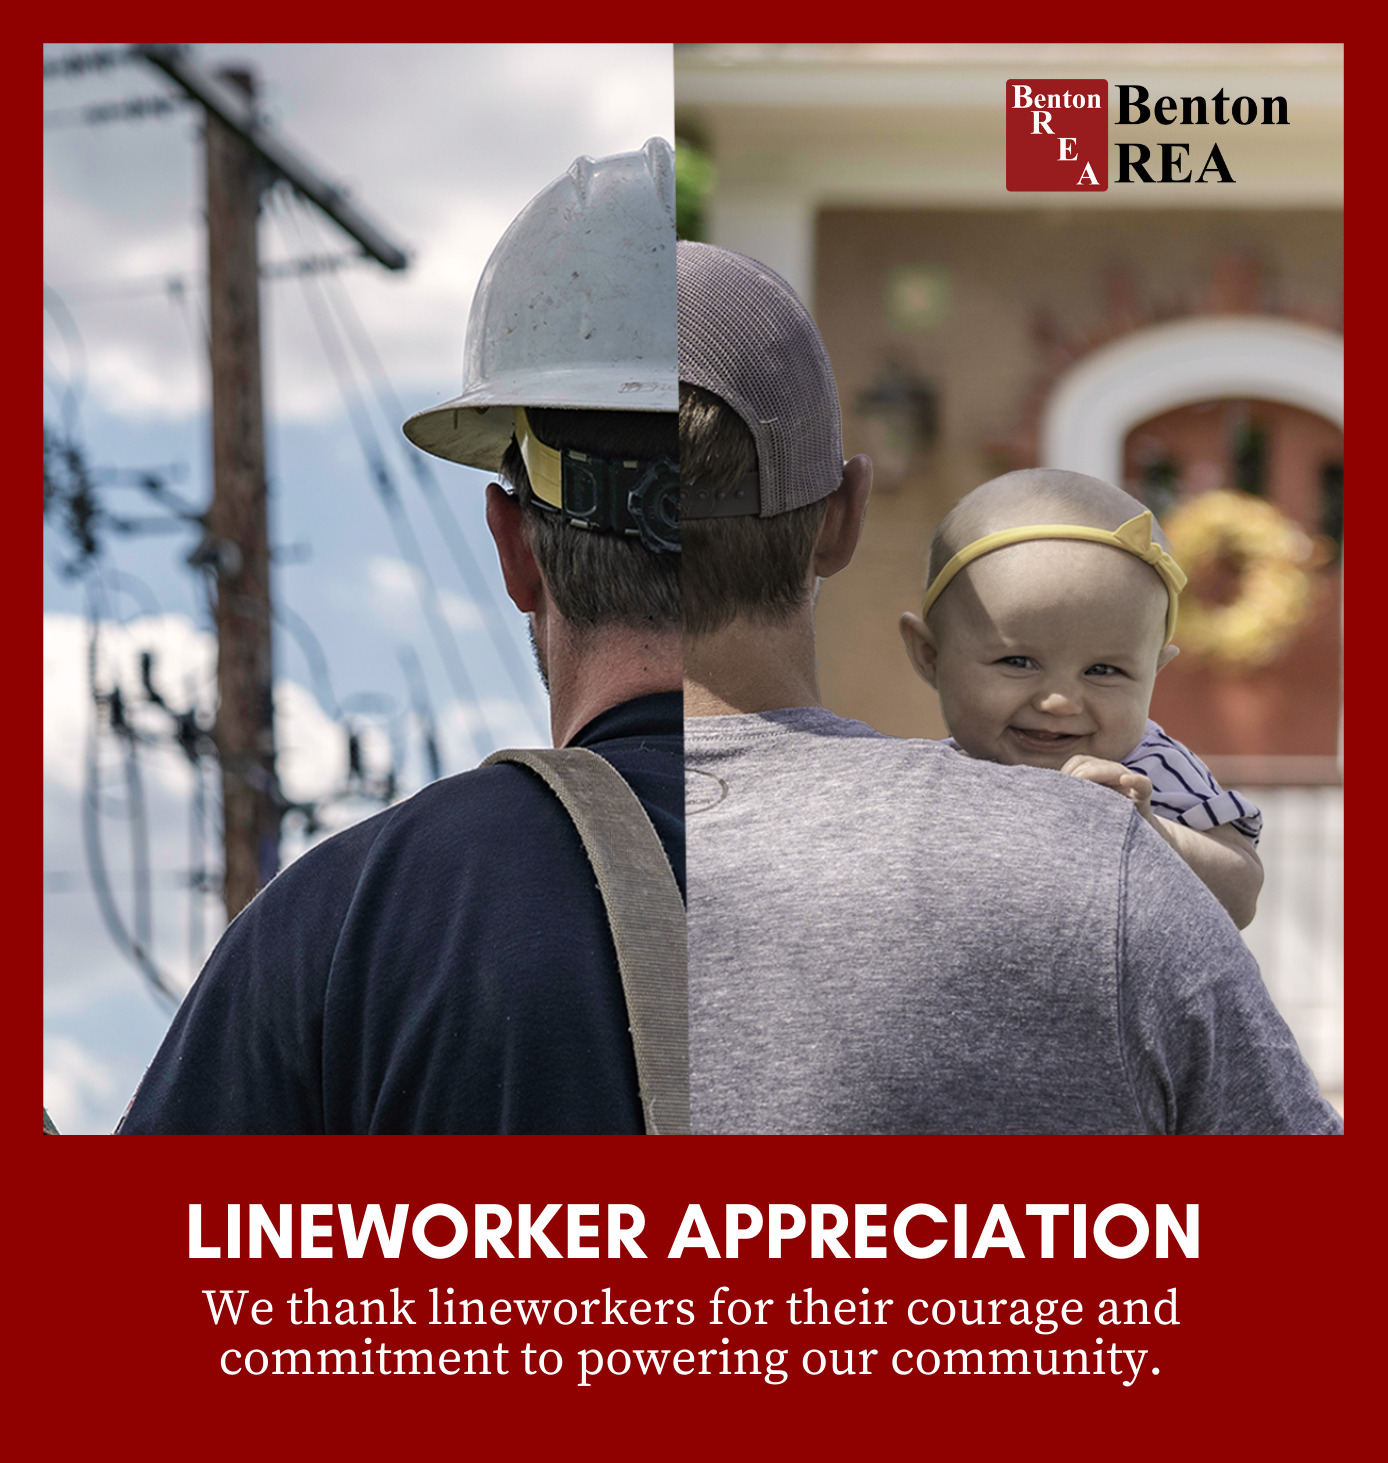 A photo split down the middle, the left shows the back left side of an electric lineworker wearing a hard hat with a powerline in the background. The right side shows the right half of a lineworker wearing a ball cap and holding a baby girl with his home in the background. It says, "Lineworker Appreciation - We thank lineworkers for their courage and commitment to powering our community."